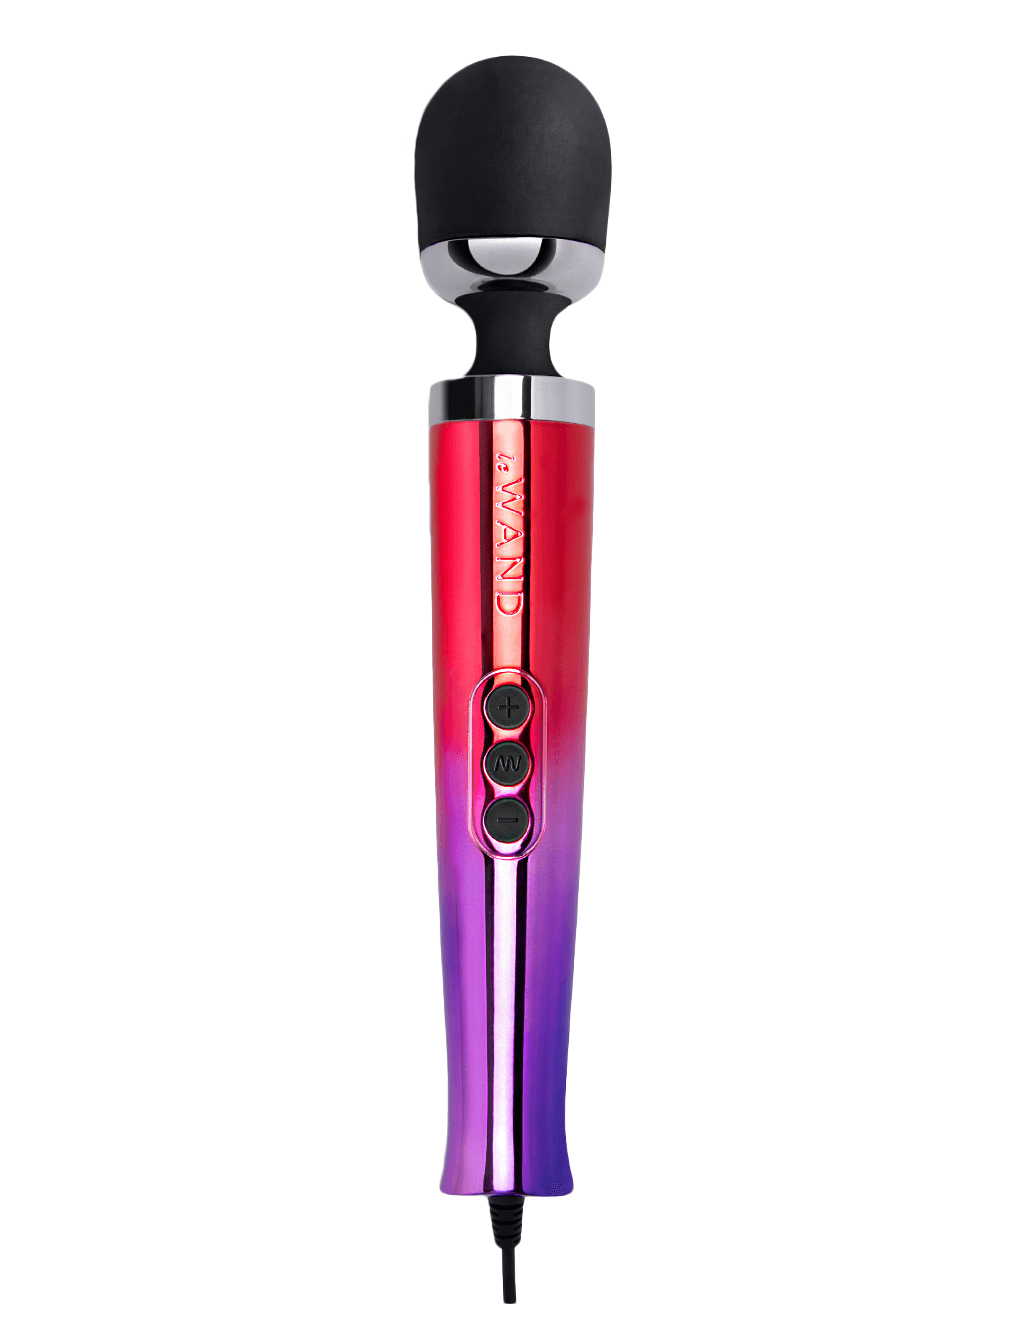 Le Wand Diecast Plug-In Vibrating Wand - Ombre - Upright